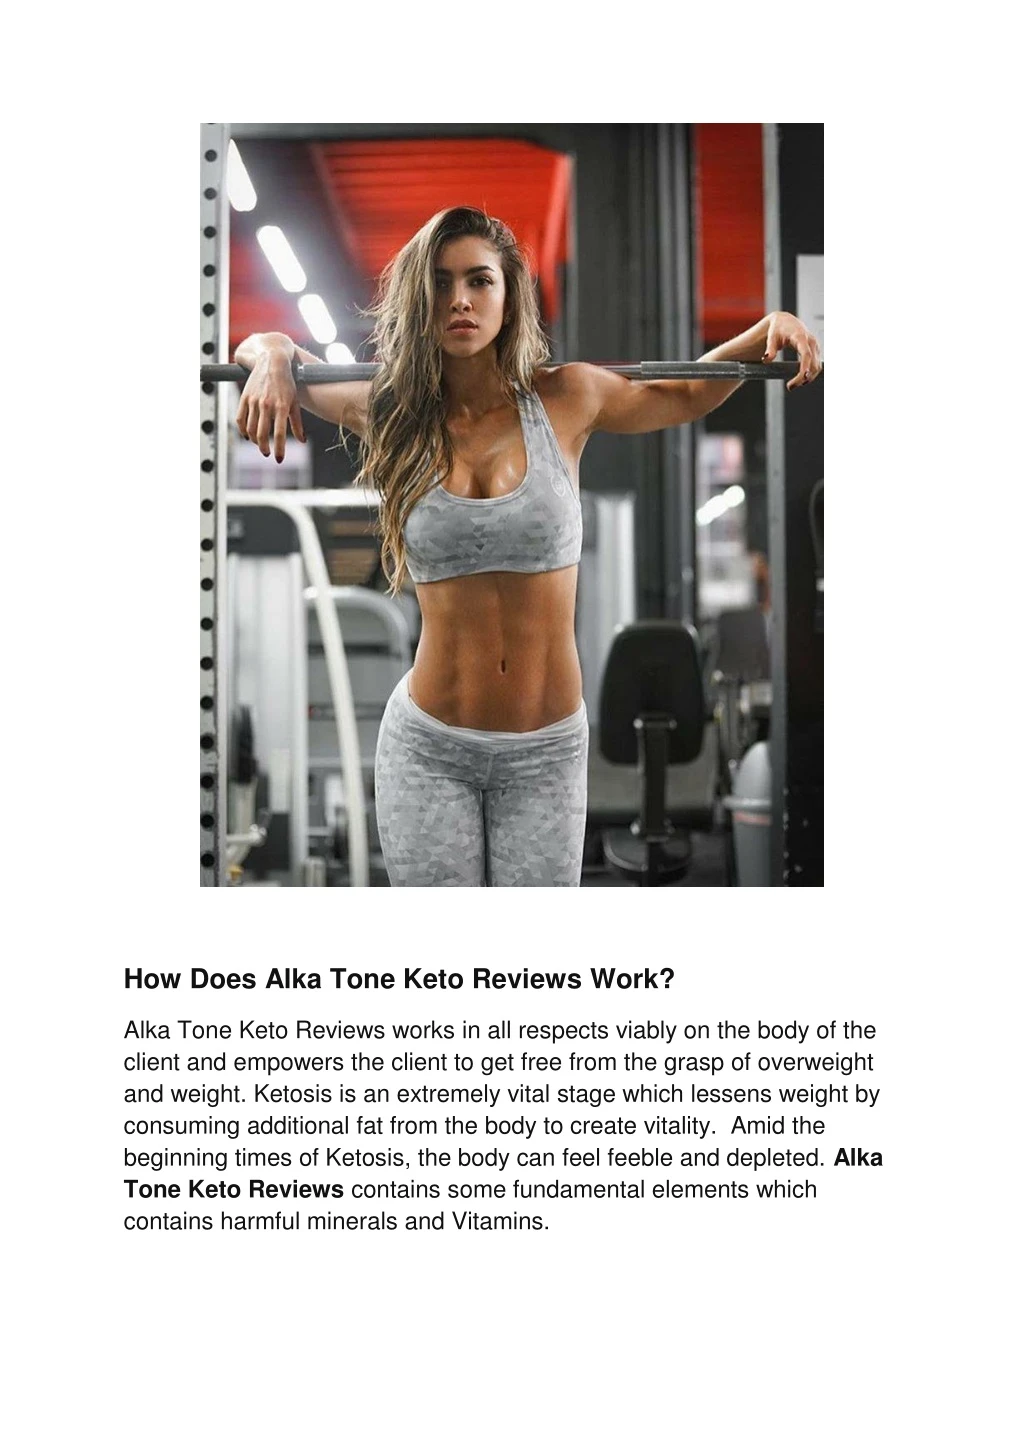 how does alka tone keto reviews work